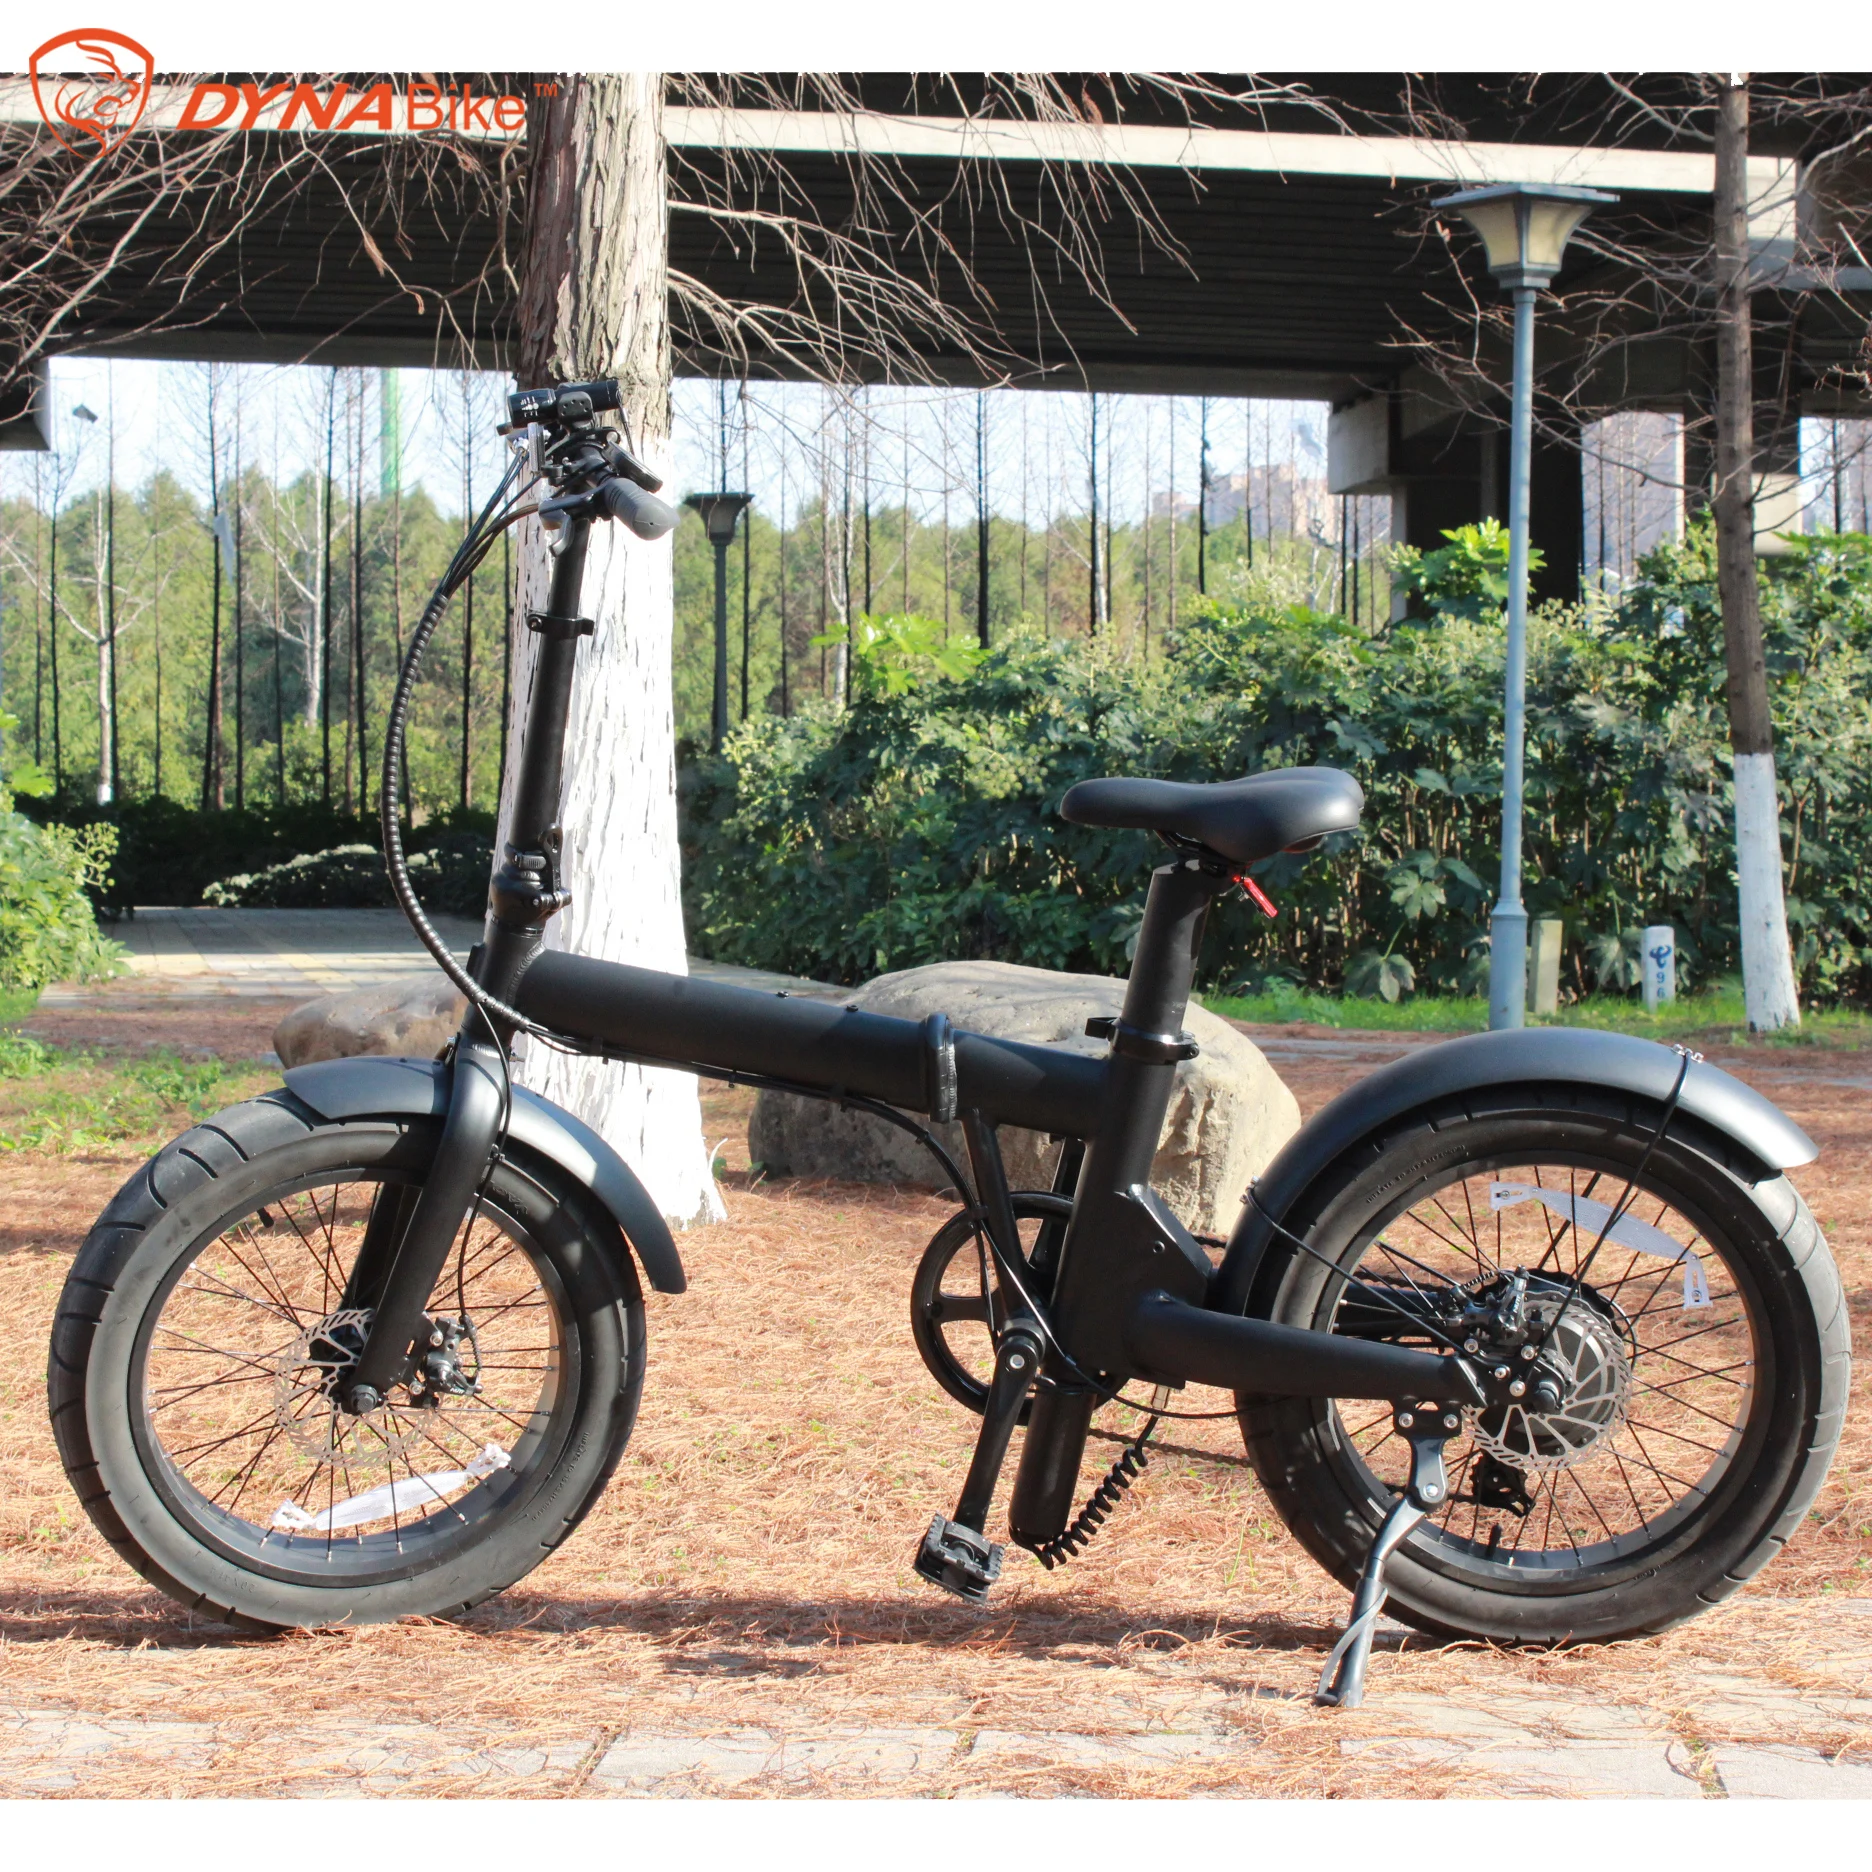 factory supply 20 inch maxload 150kg folding electric bicycle